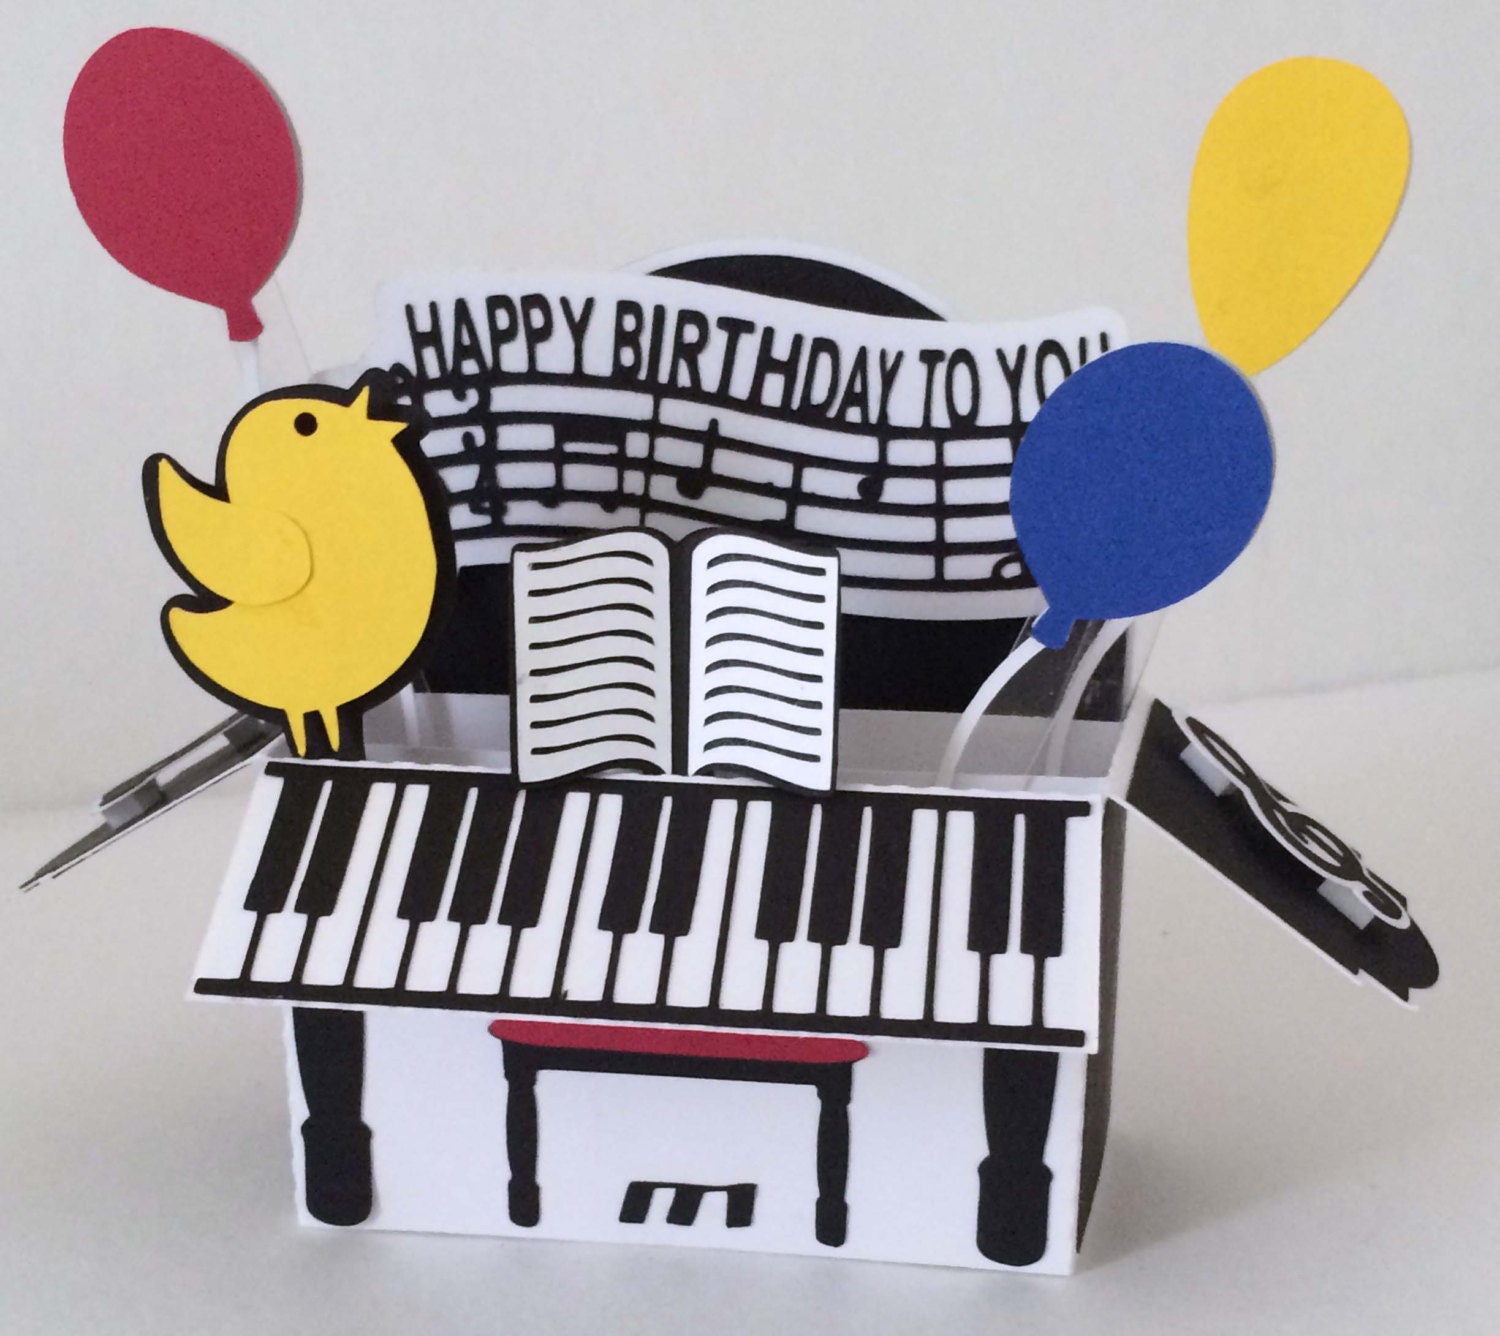 Download Happy Birthday Piano Card In A Box 3D SVG from ...